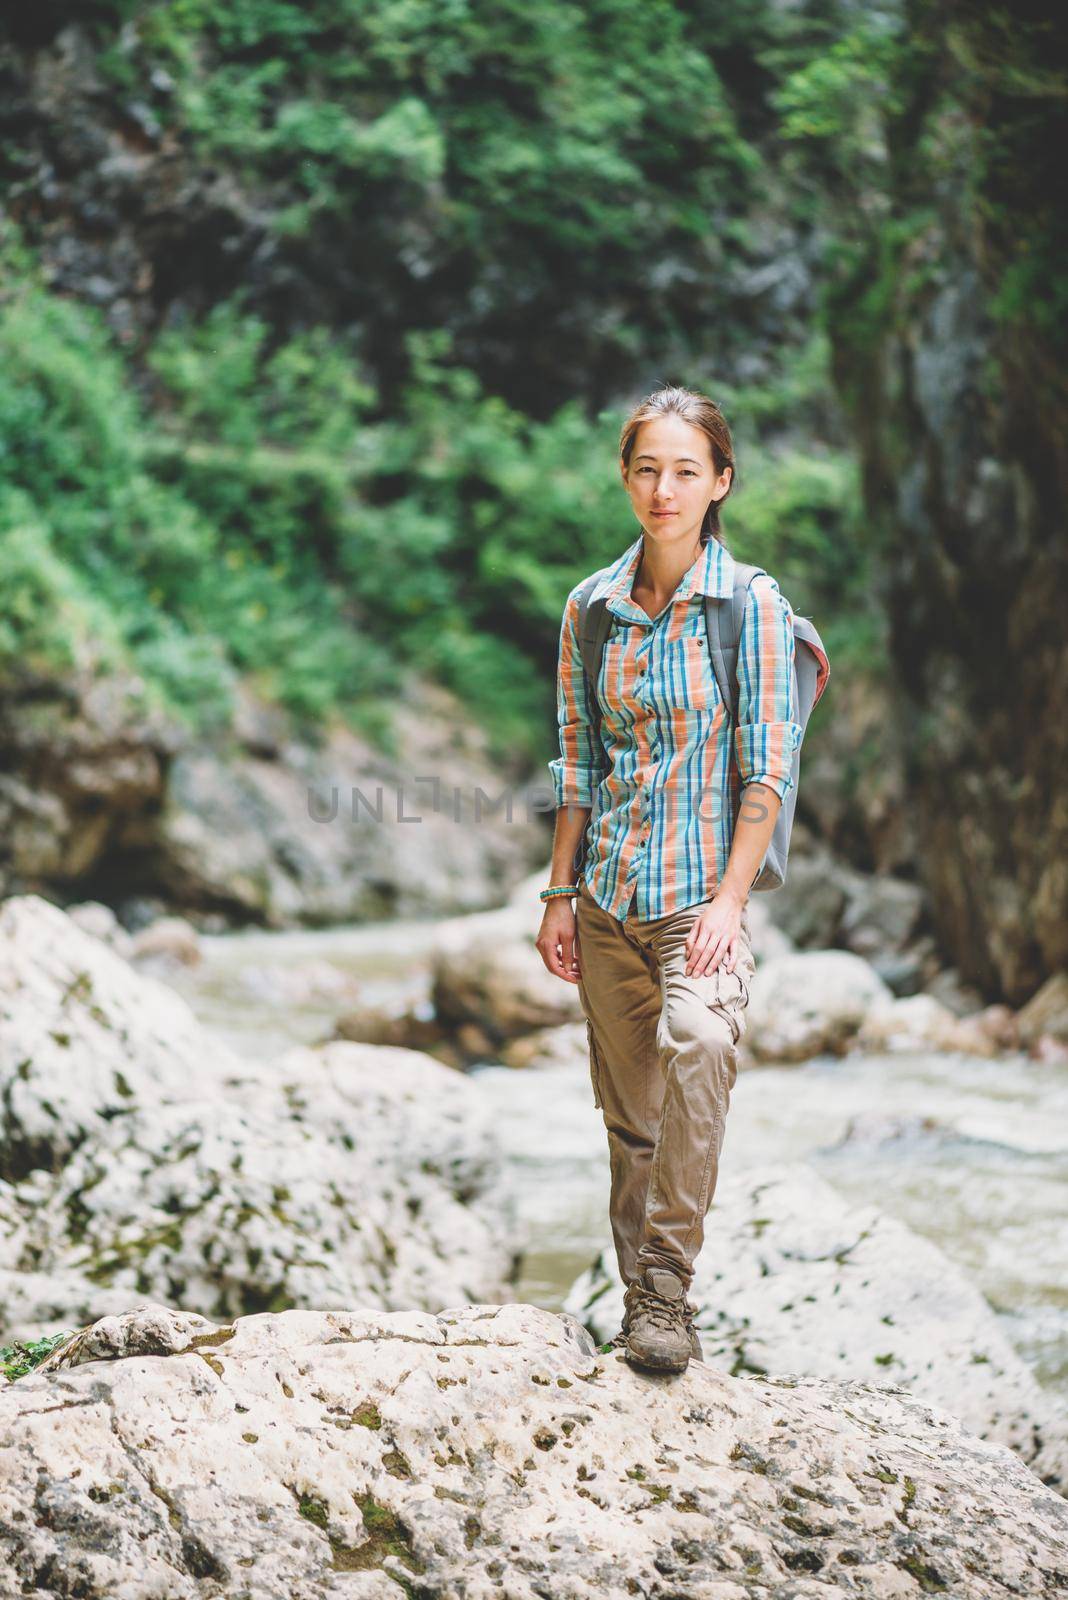 Explorer young woman wearing in cargo pants and plaid shirt standing on rocky stone outdoor, looking at camera.